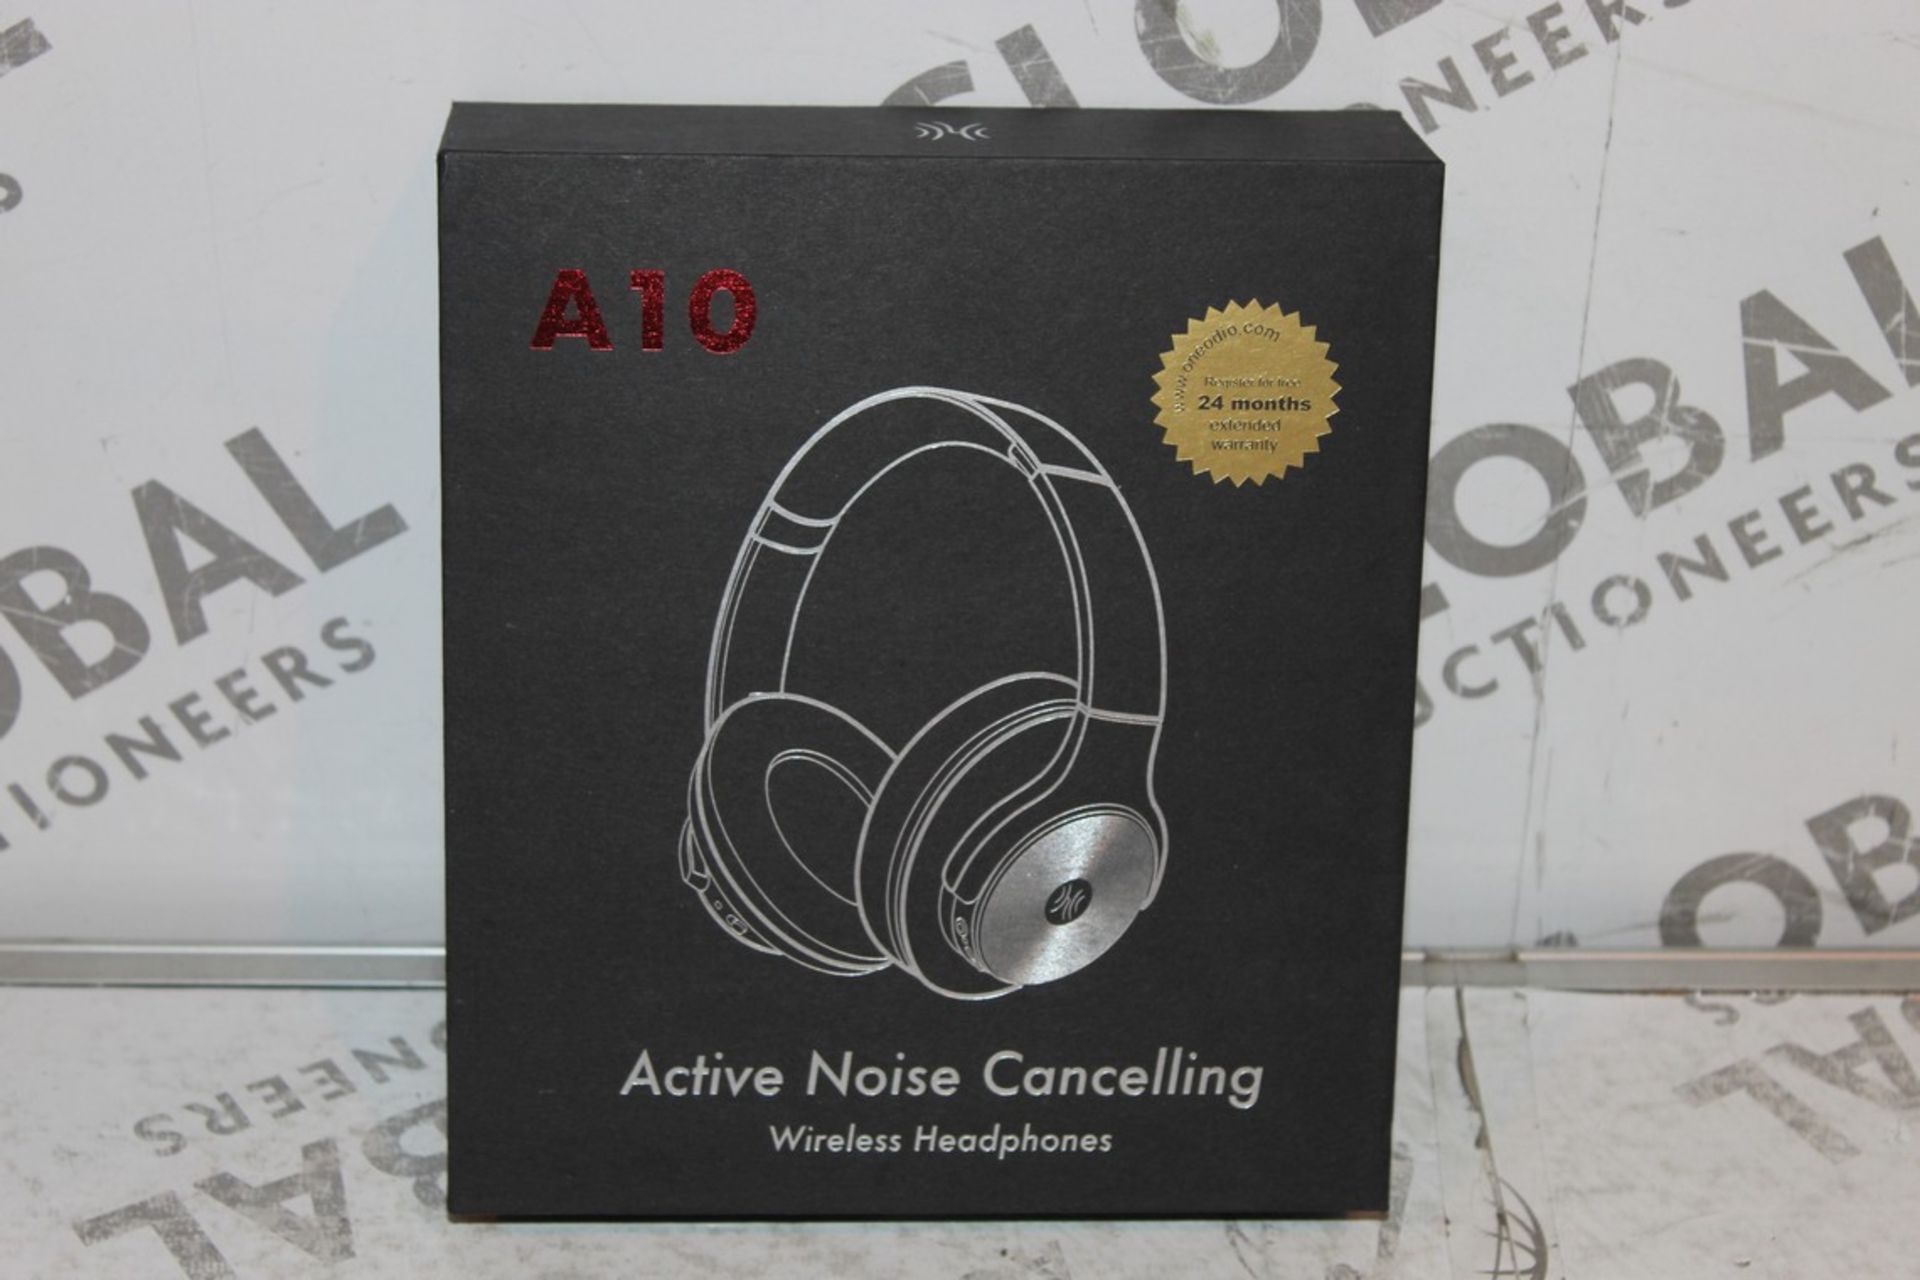 Boxed Set of A10 Active Noise Cancelling Headphones RRP £59.99